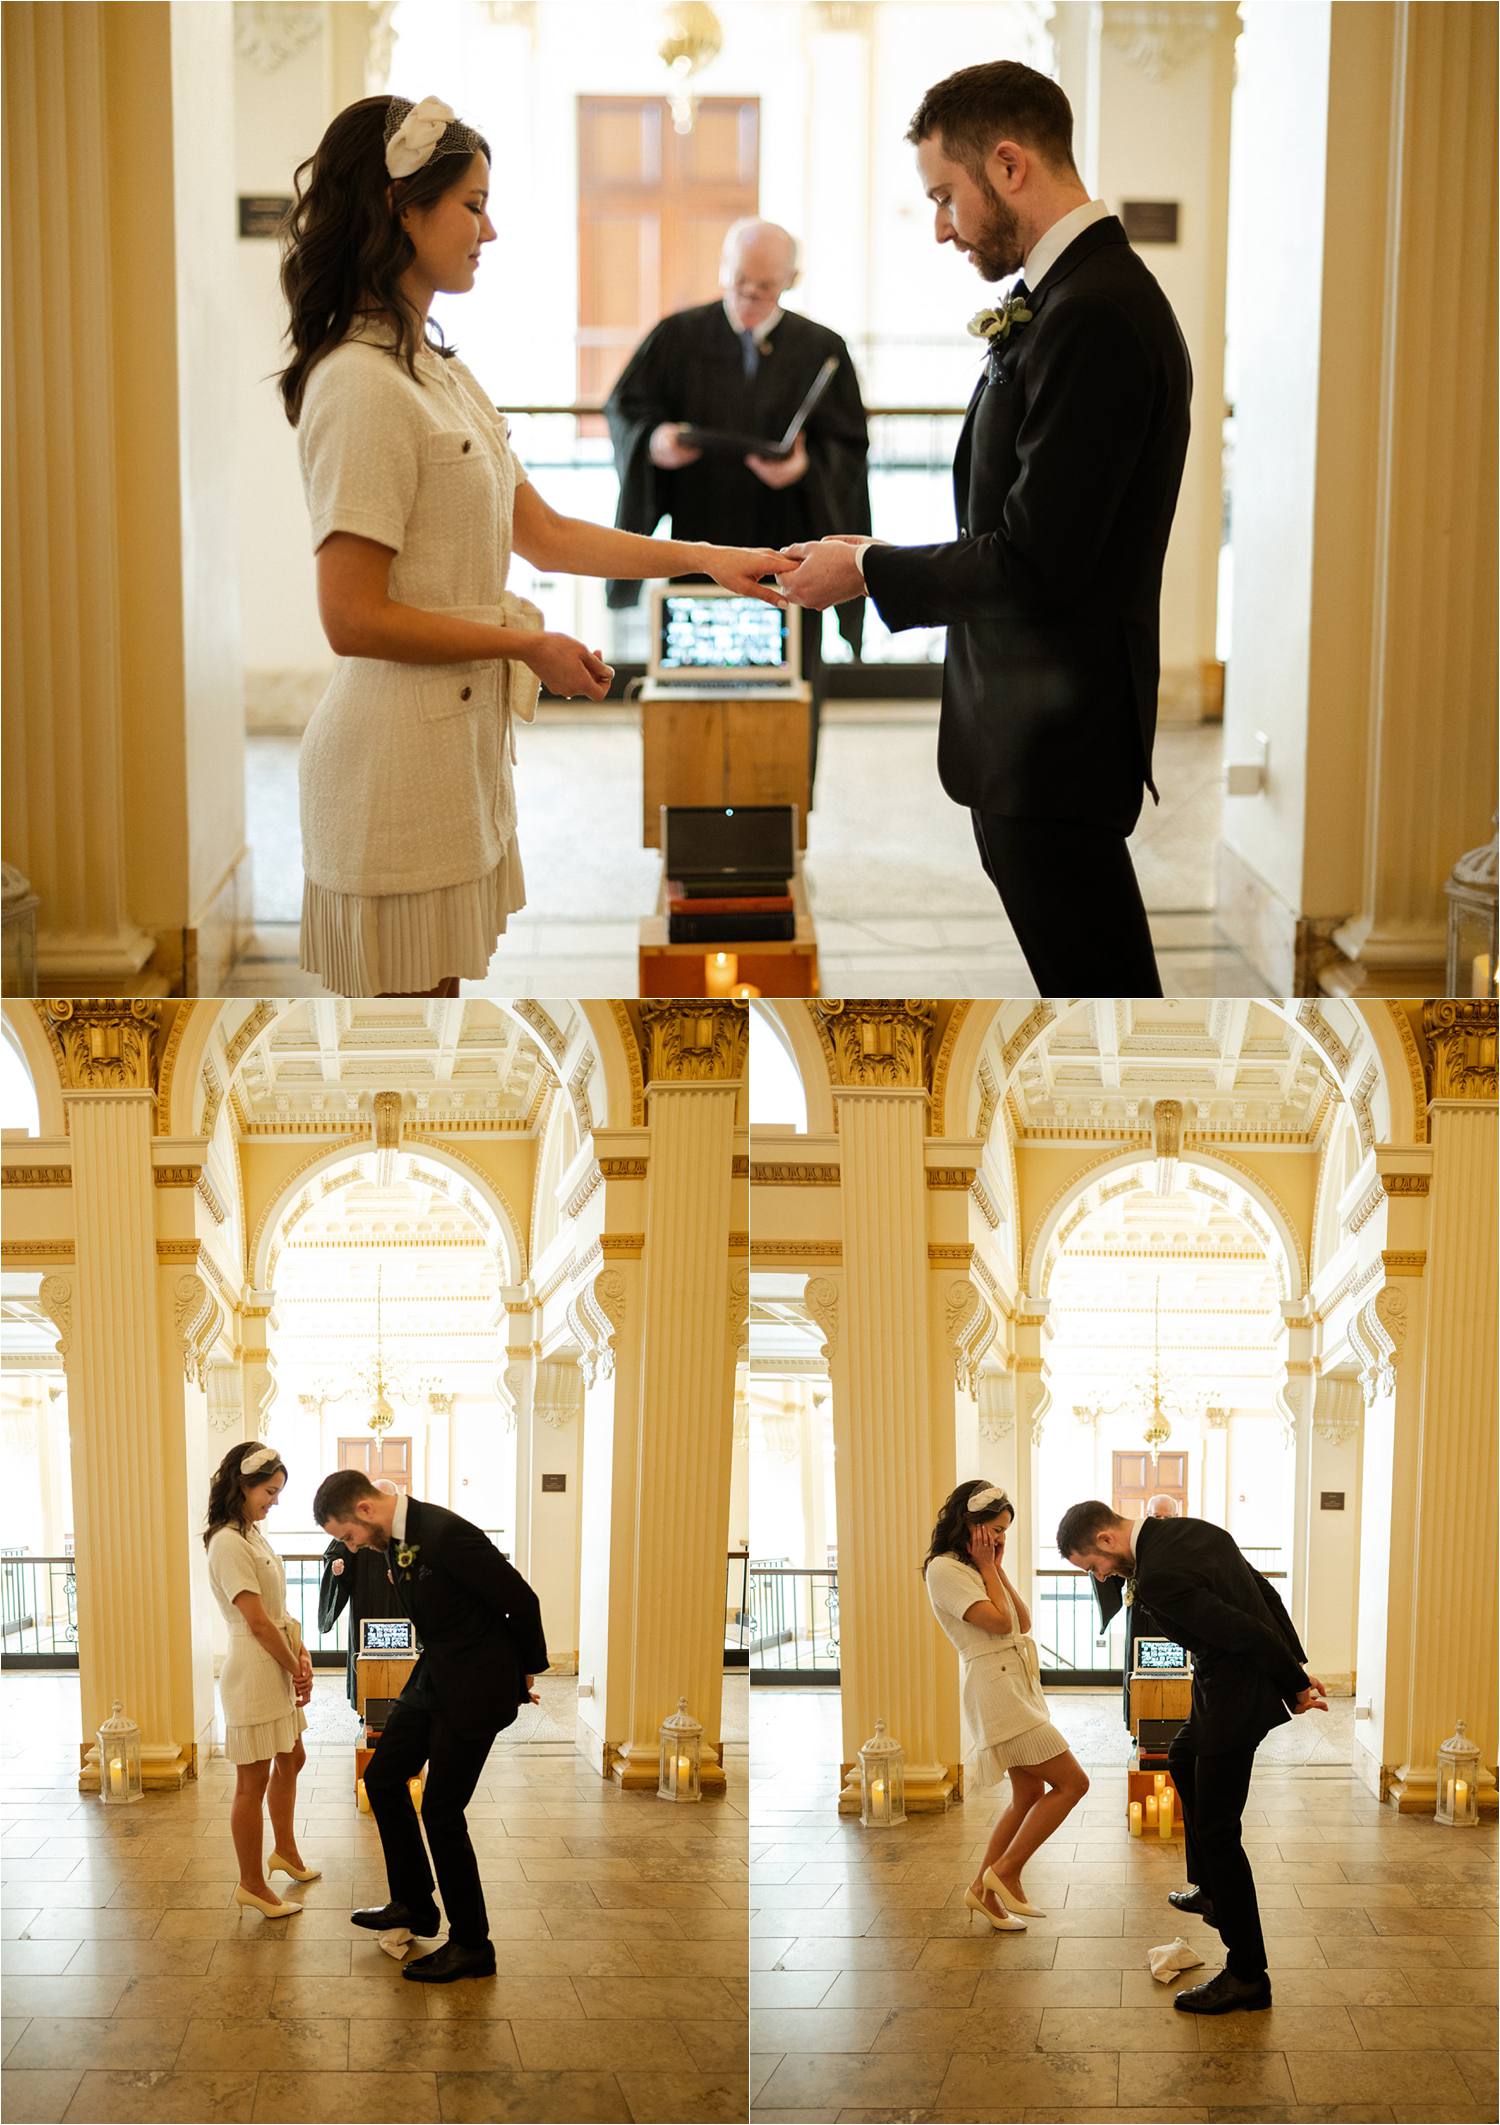 Bride and groom exchange rings and groom steps on glass during wedding ceremony